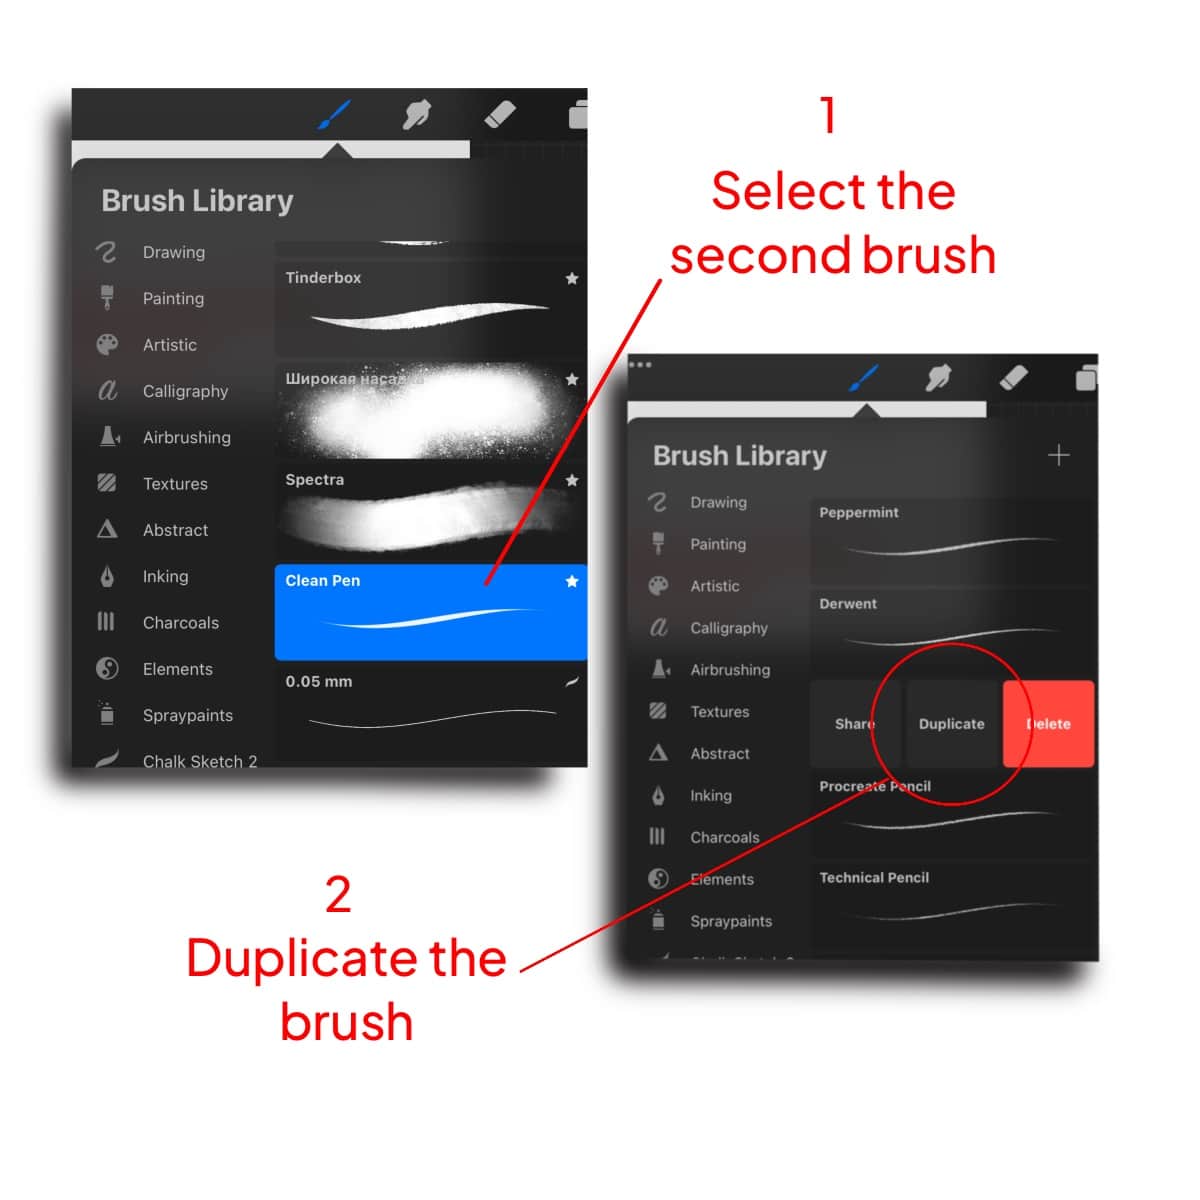 Selecting the second brush